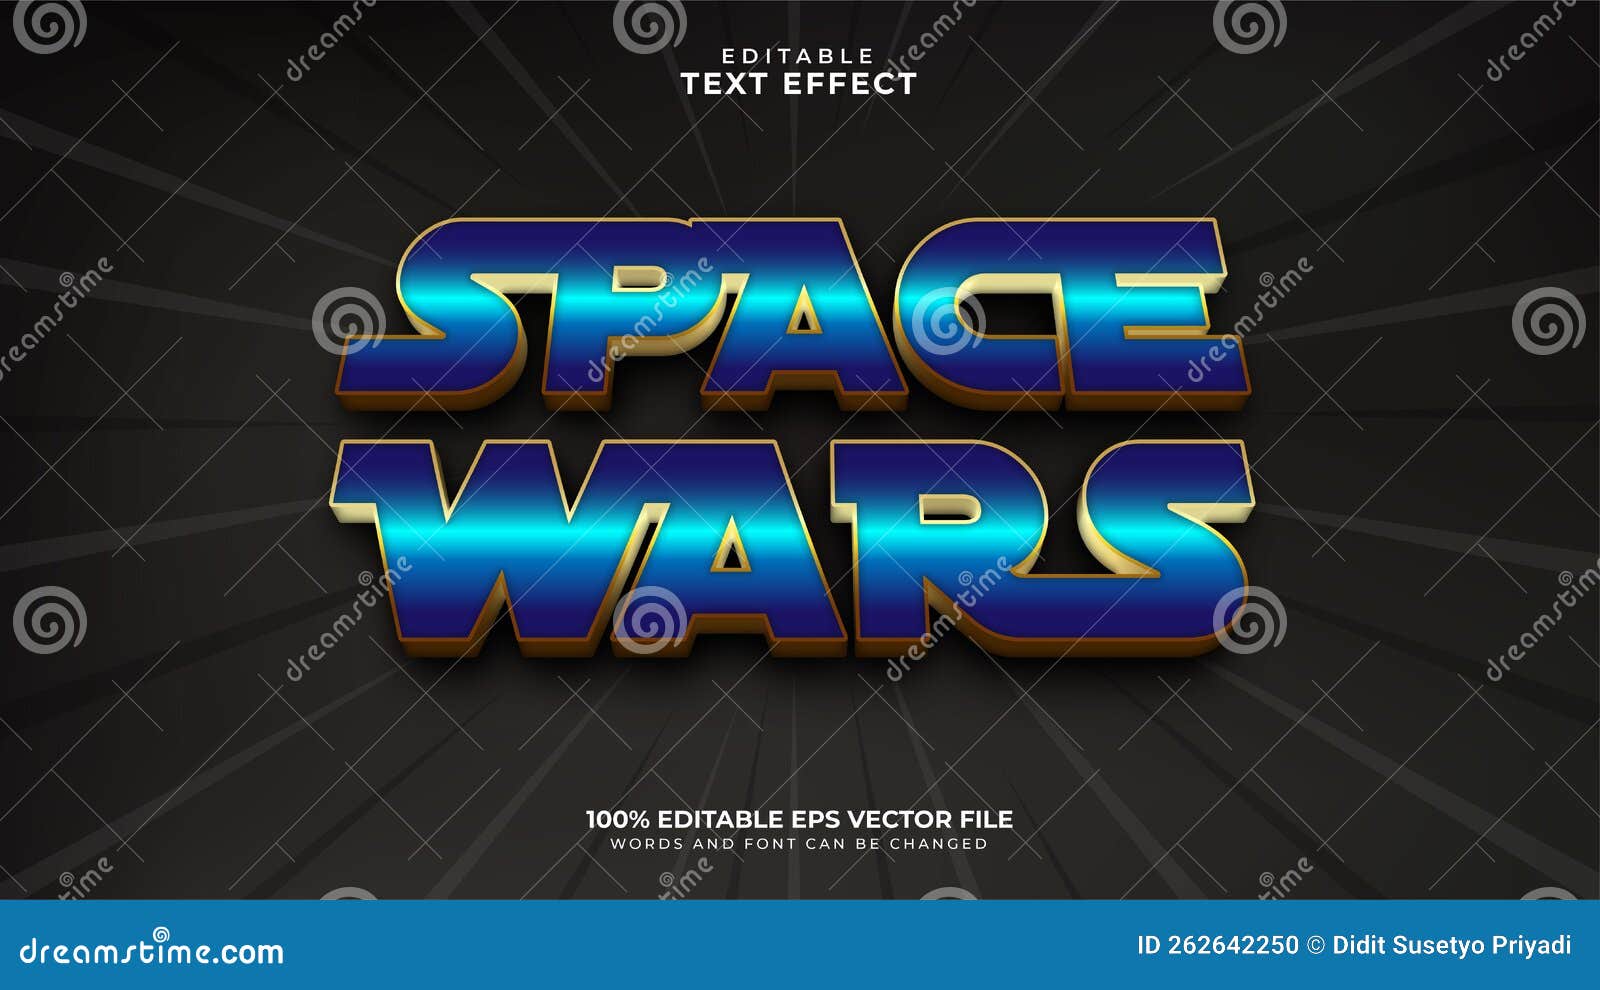 space wars text effect, editable text effect